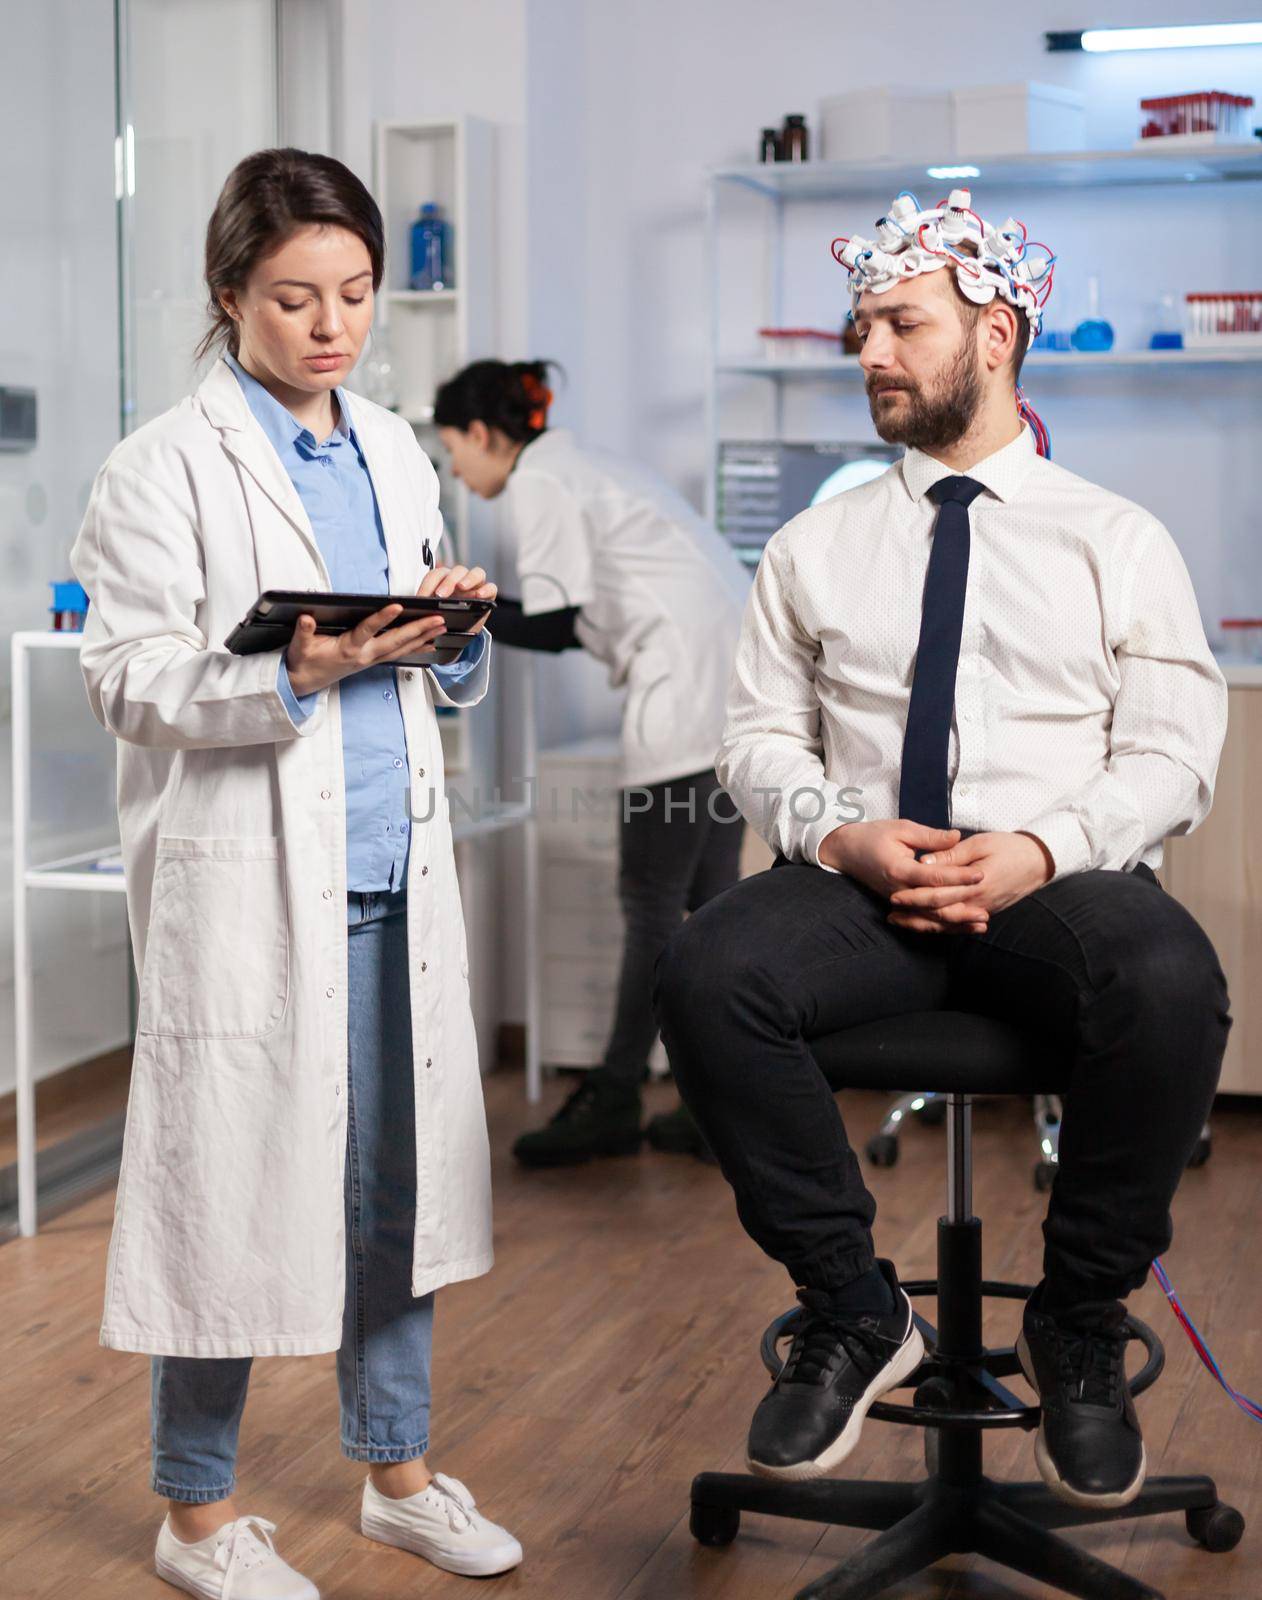 Specialist doctor in neuroscience taking notes on clipboard while testing brain functions of man using eeg headset, treating nervous system dysfunctions in moden laboratory.